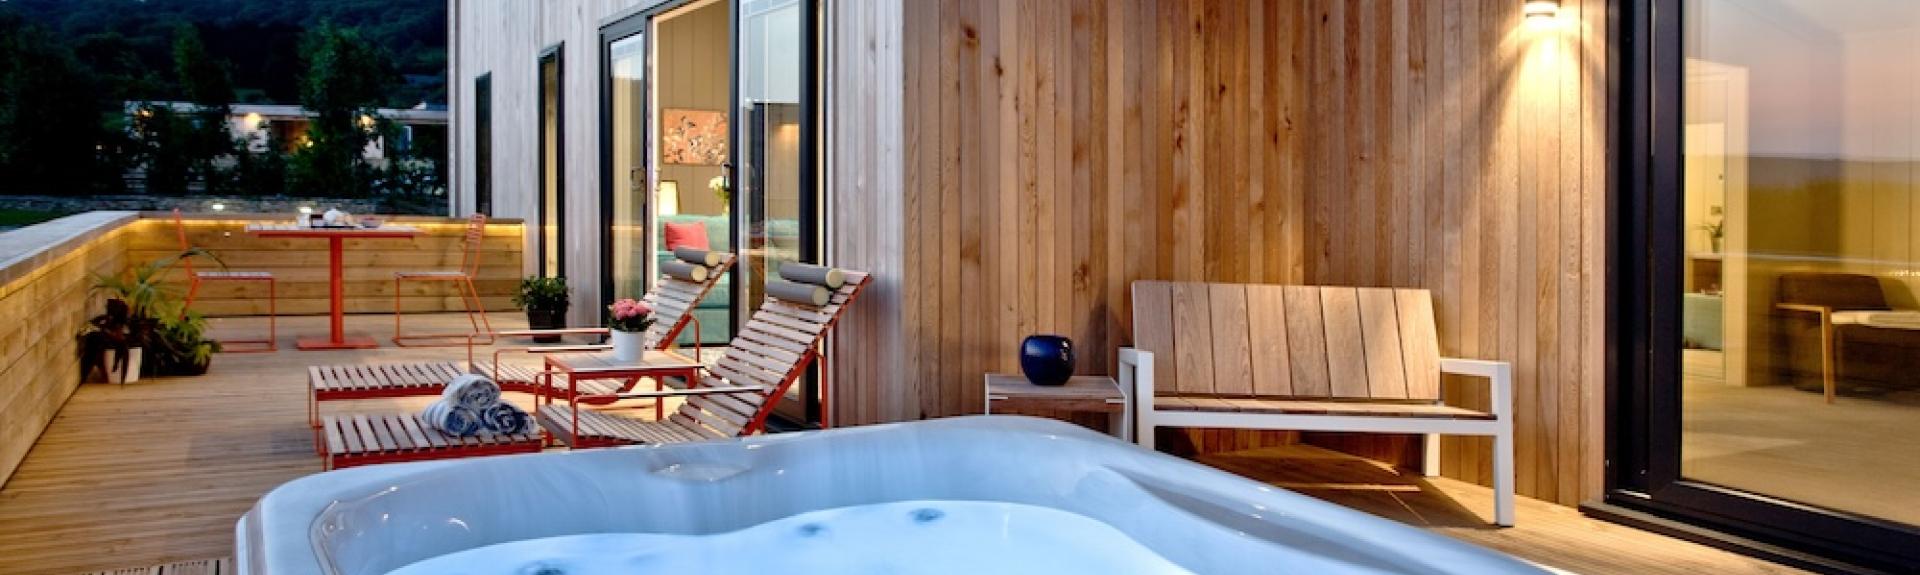 A hot tub and sunloungers on the deck of an timber eco lodge.